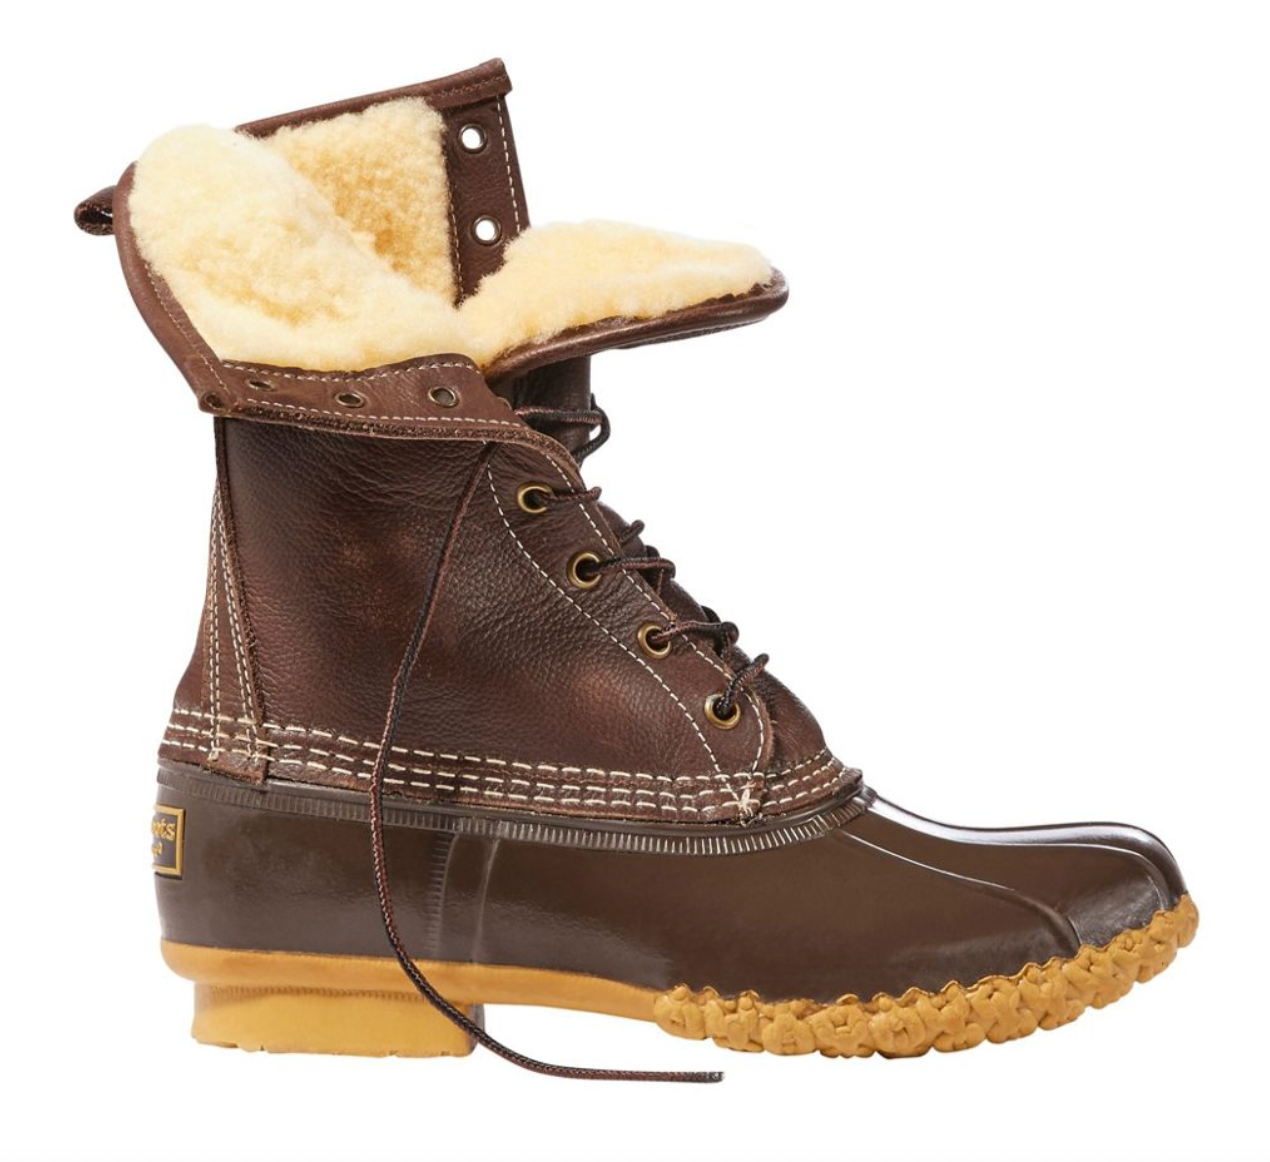 L.L. Bean Bean Boots, 10" Shearling-Lined